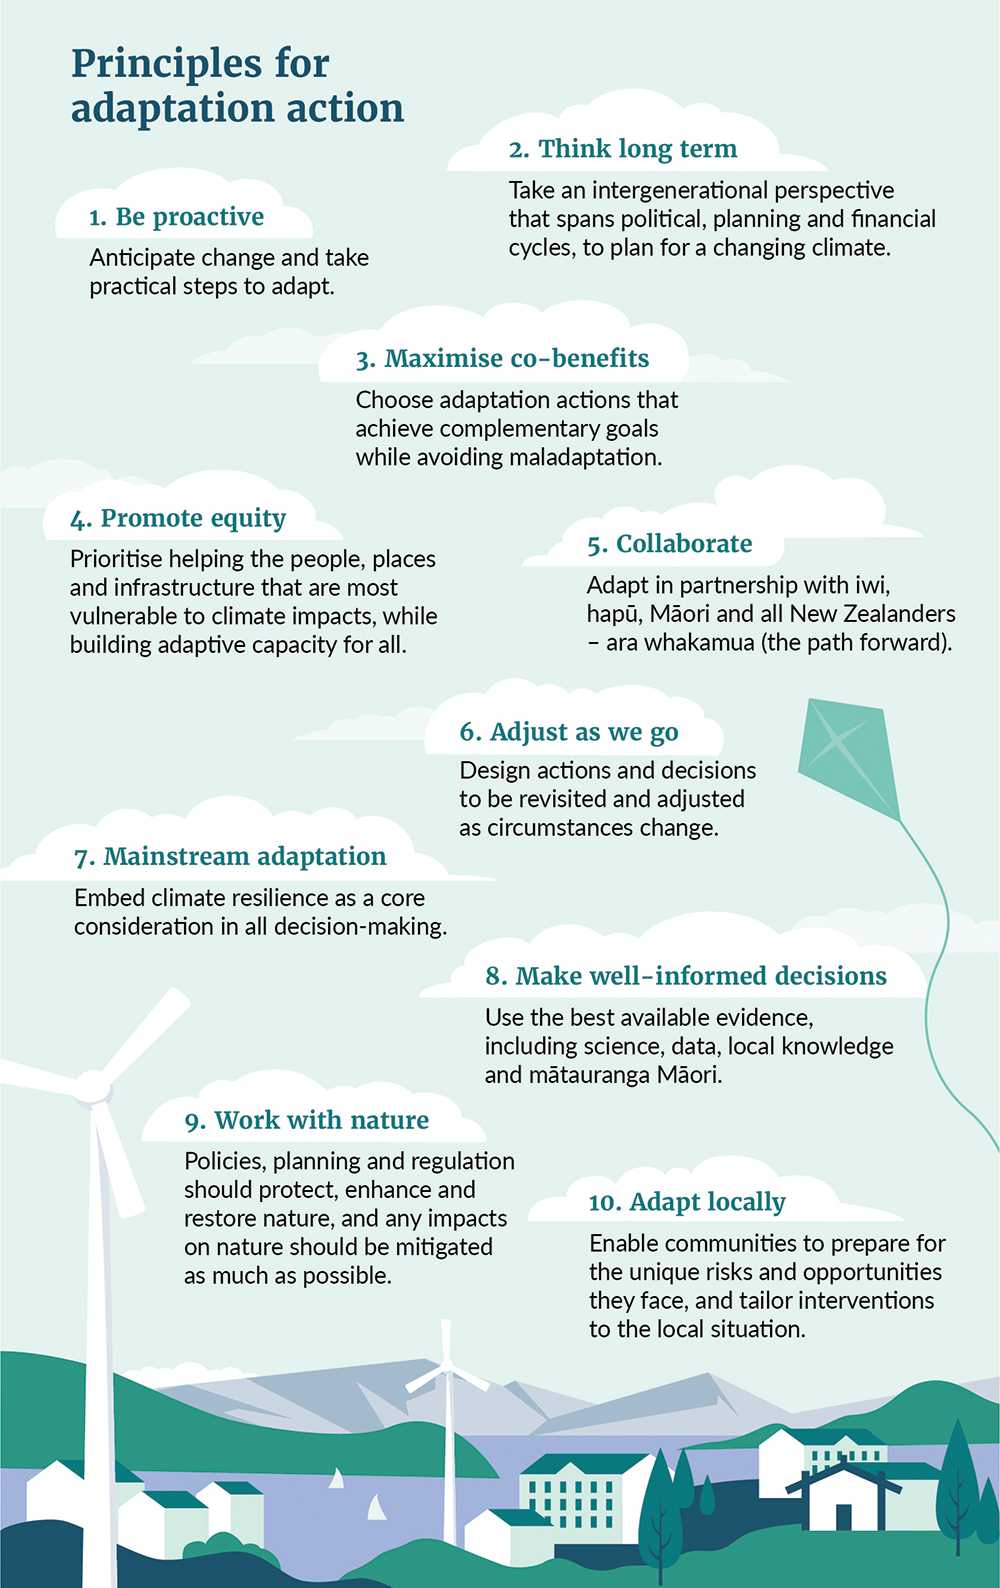 An infographic listing the ten principles for adaptation action.